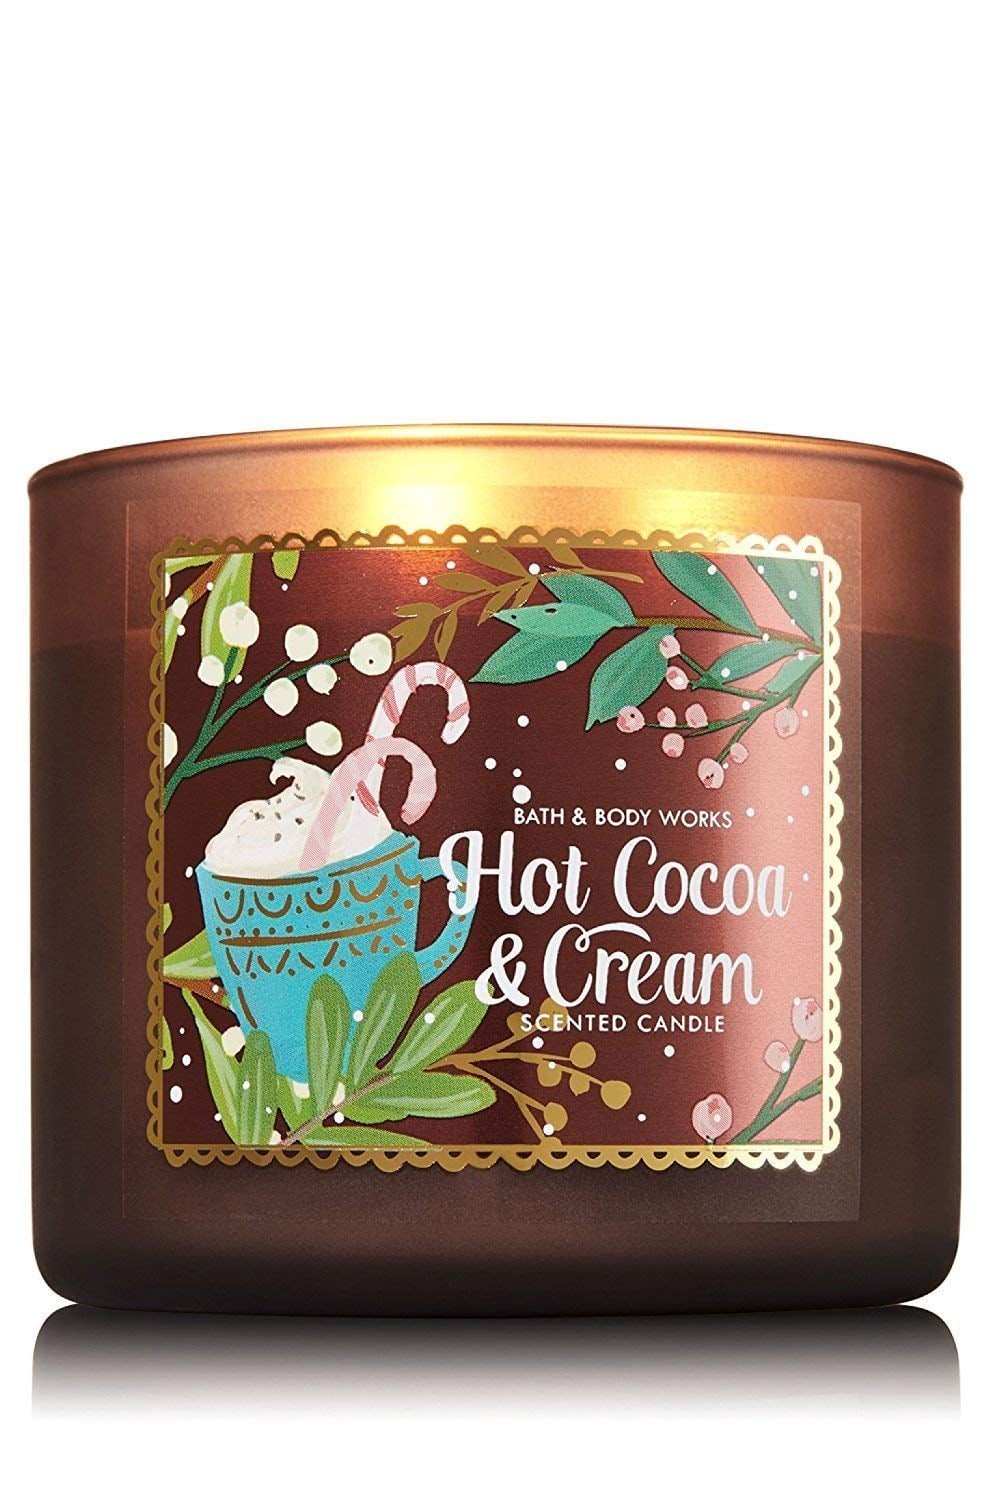 Bath and body works Candles. Body Candle. Bath body works свечи